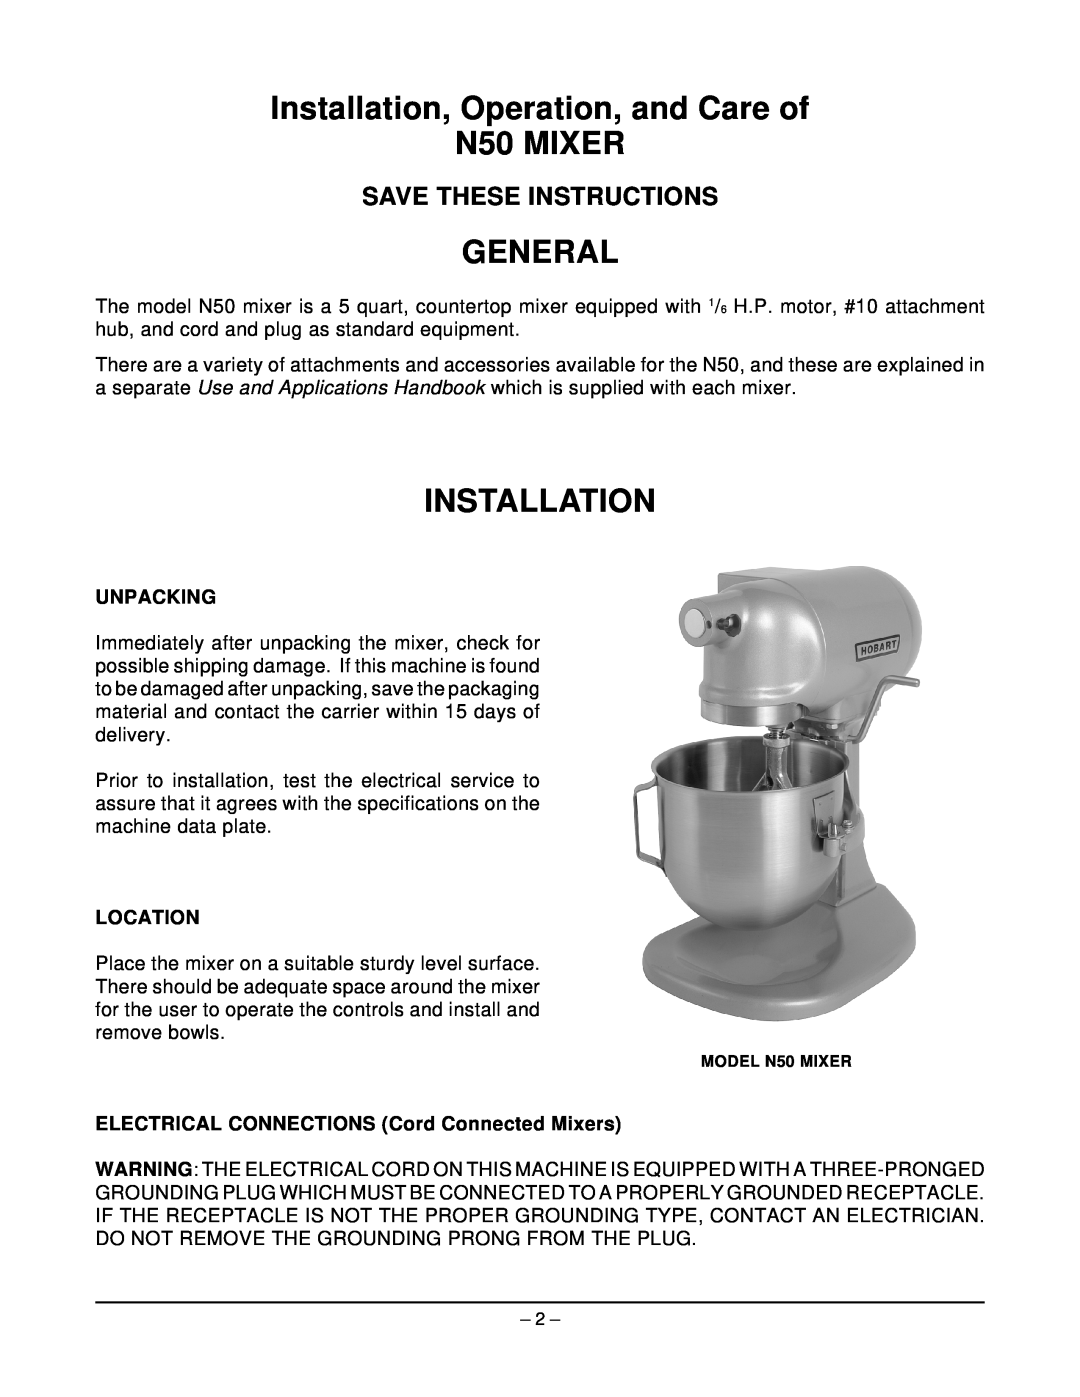 Hobart N50 ML-33777 Installation, Operation, and Care of N50 MIXER, General, Unpacking, Location, Save These Instructions 